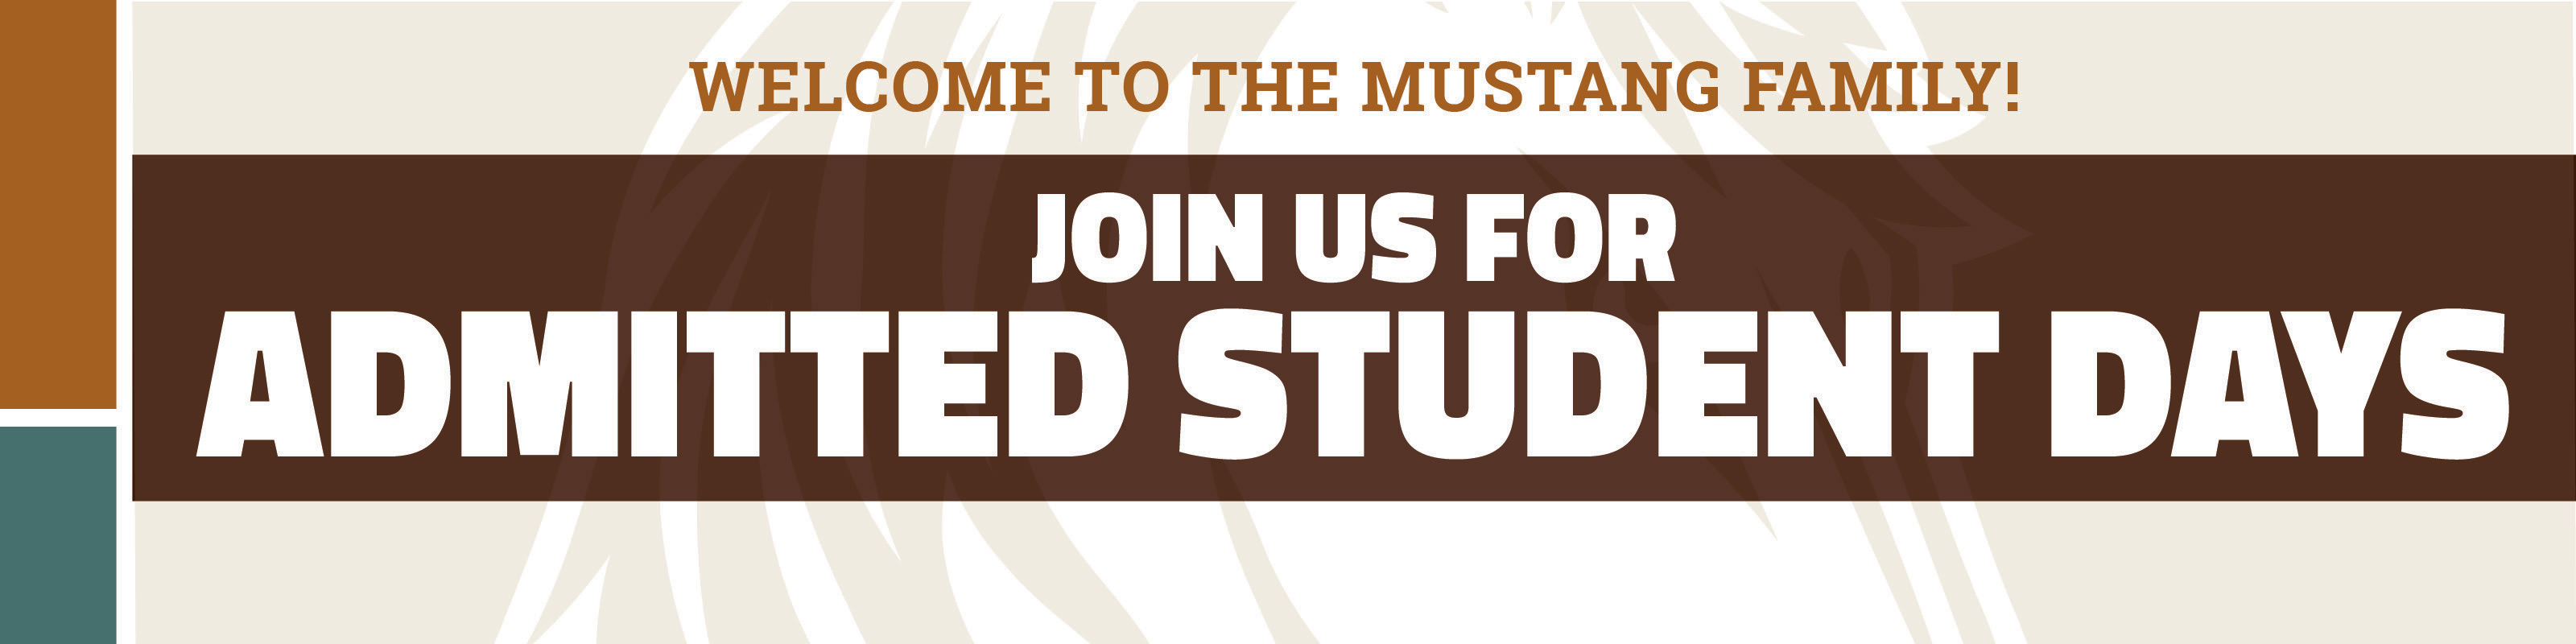 Welcome to the Mustang Family! Join Us For Admitted Student Days